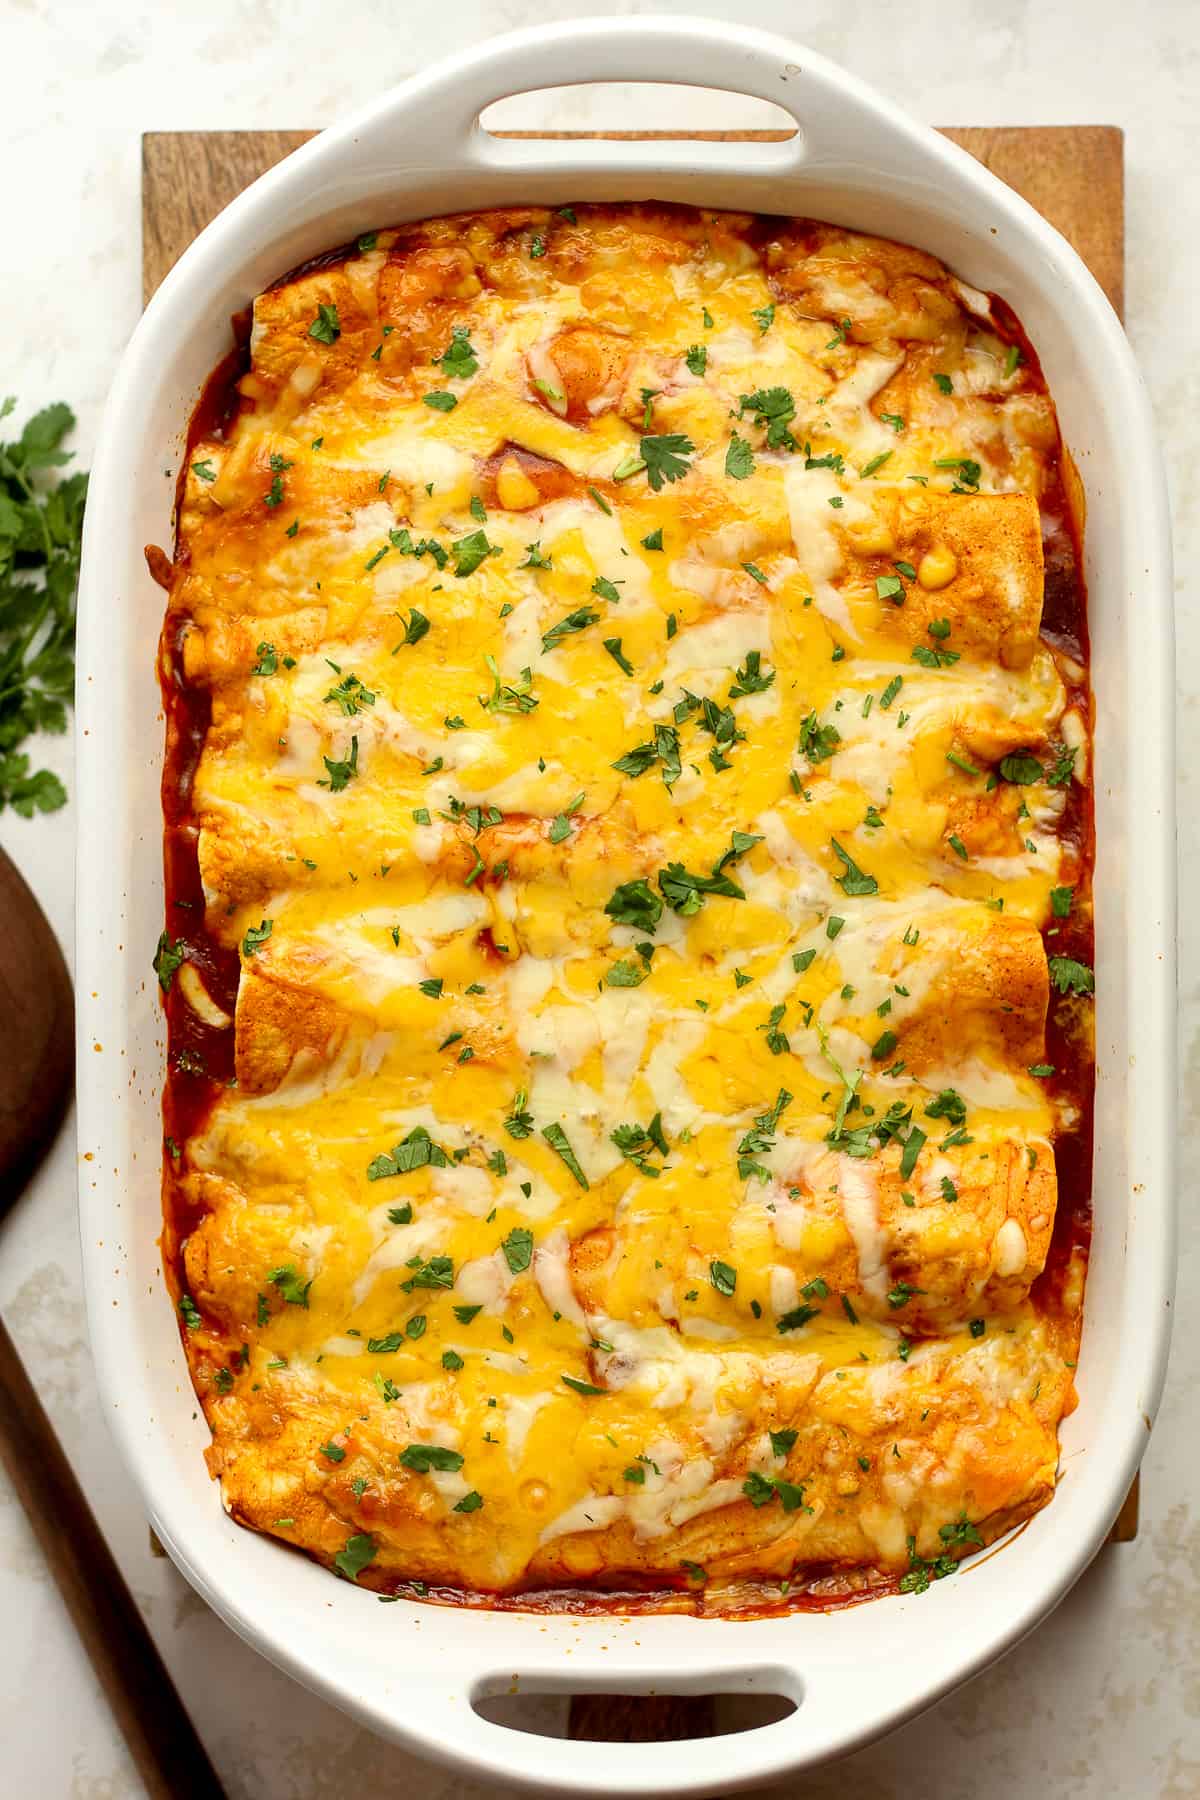 A casserole dish of shredded beef enchiladas with red sauce.